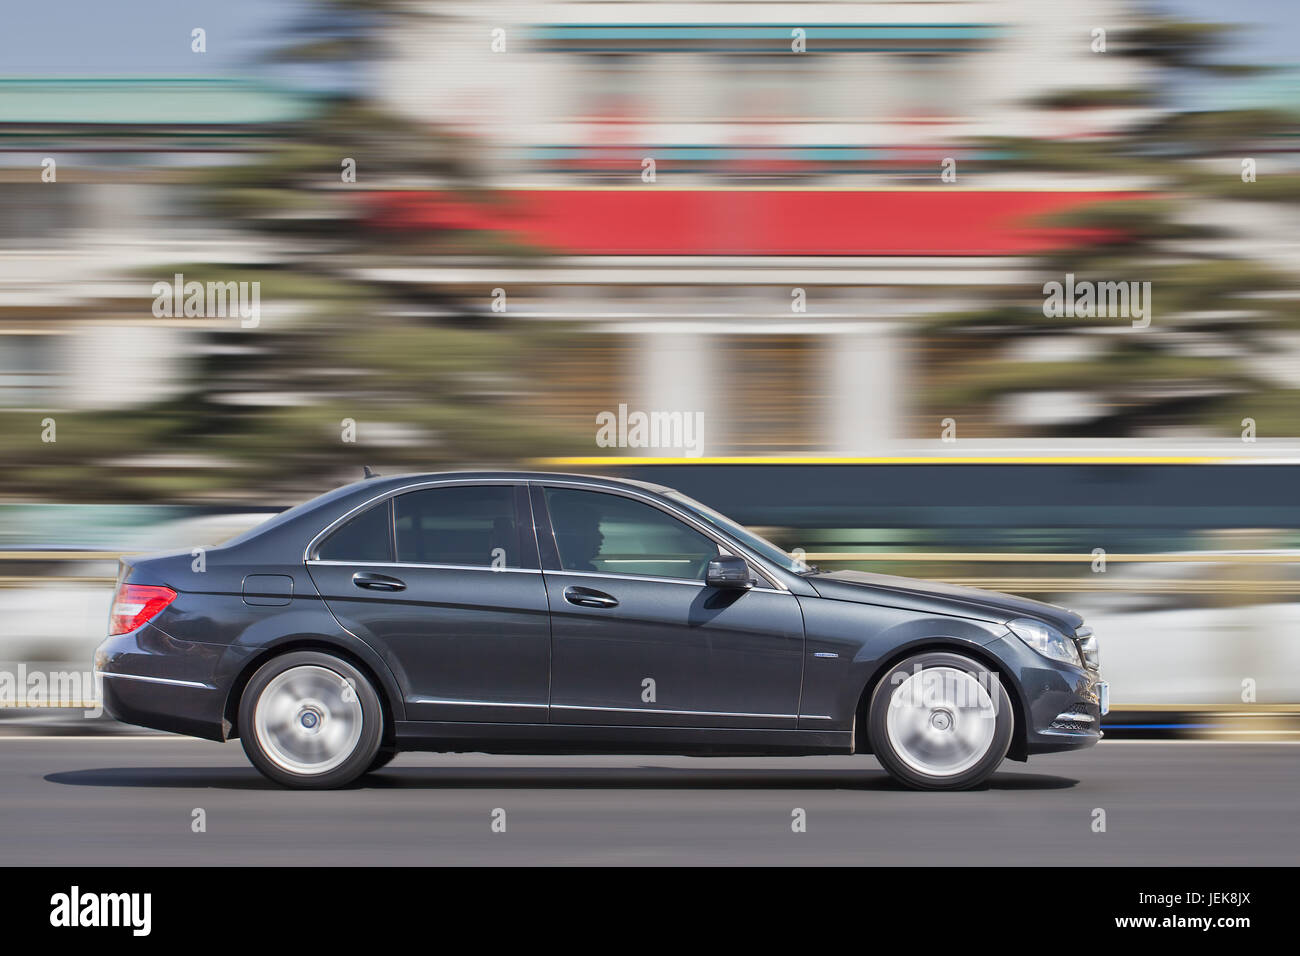 BEIJING-MARCH 30, 2016. Mercedes-Benz C-Class. Luxury-car makers can count on China’s growing wealth. Stock Photo